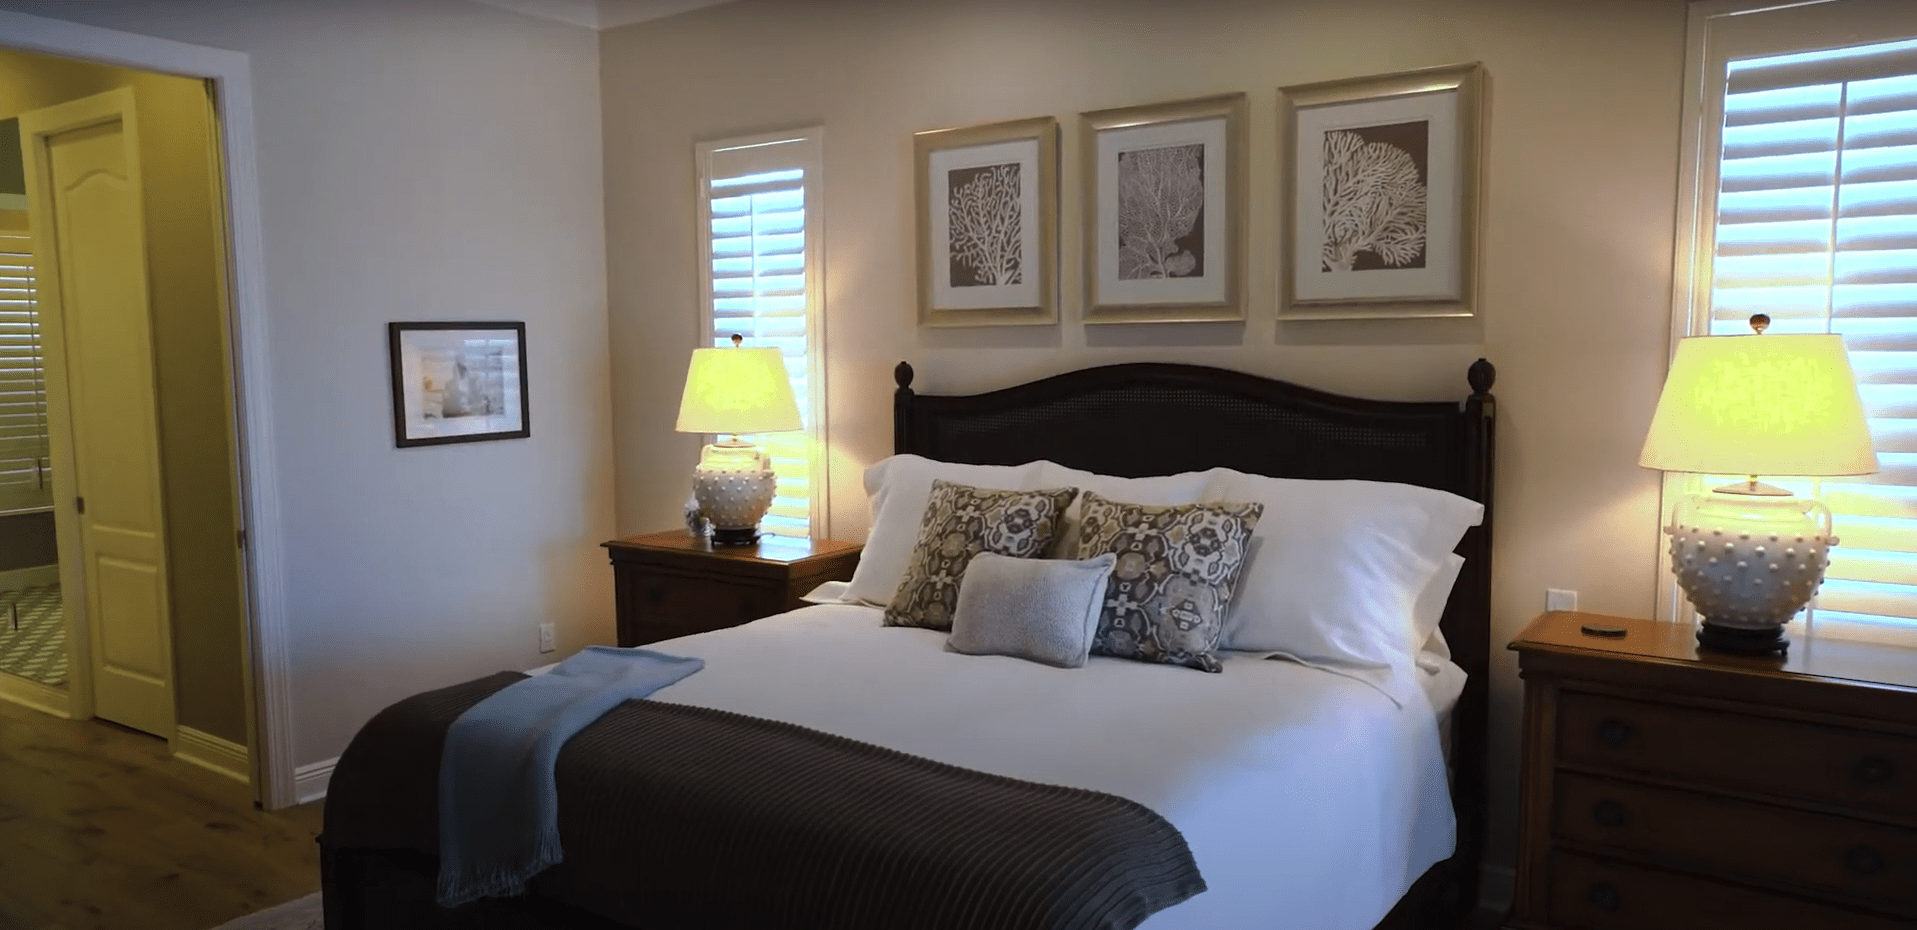 The master bedroom in the Boca Grande model home at Shell Point Retirement Community